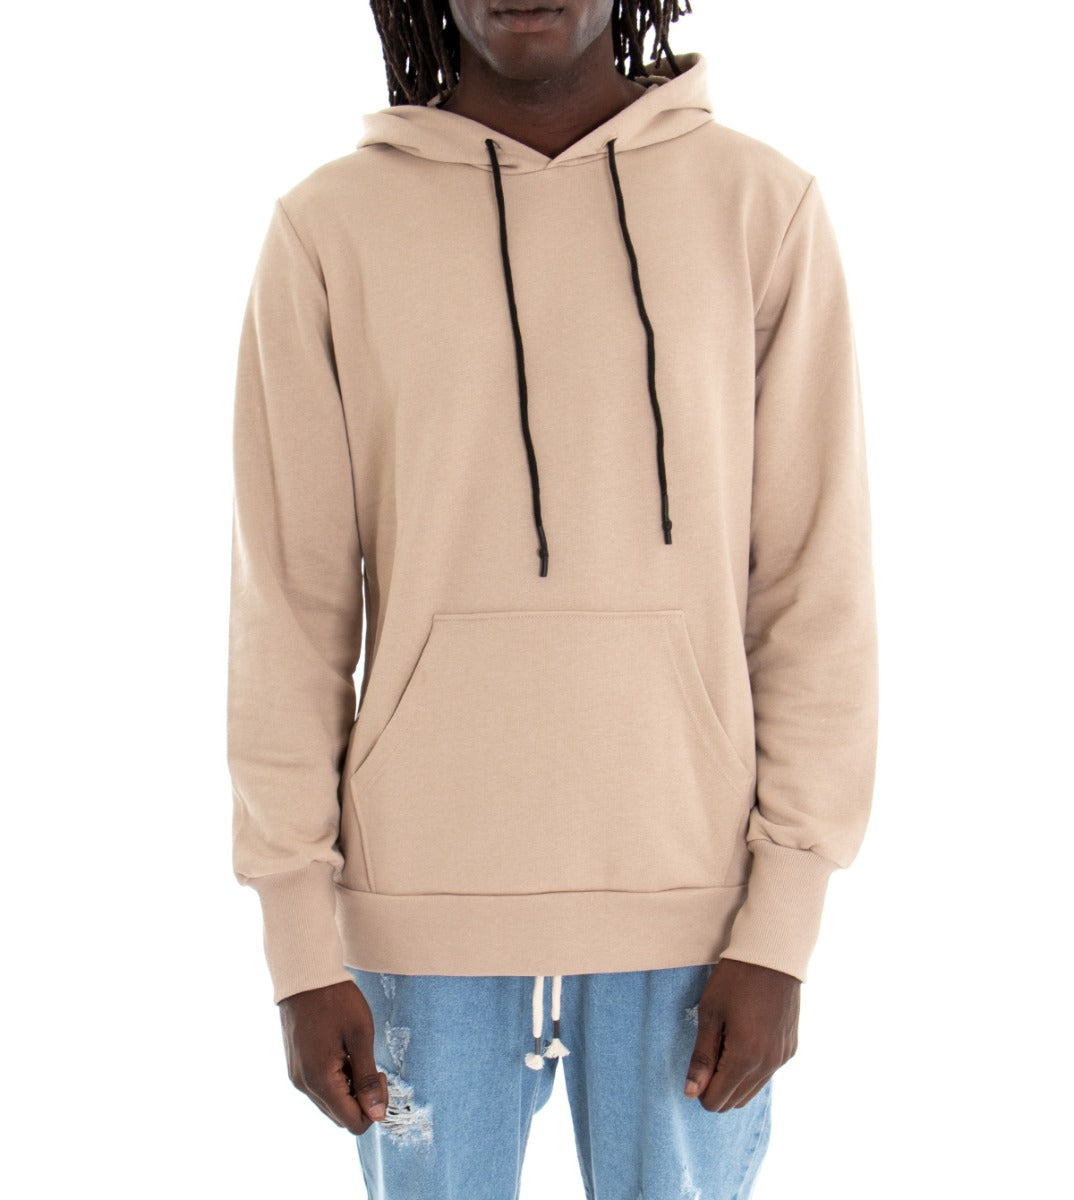 Men's Hooded Sweatshirt with Glove Sleeves Solid Color Beige Regular Fit GIOSAL-F2697A